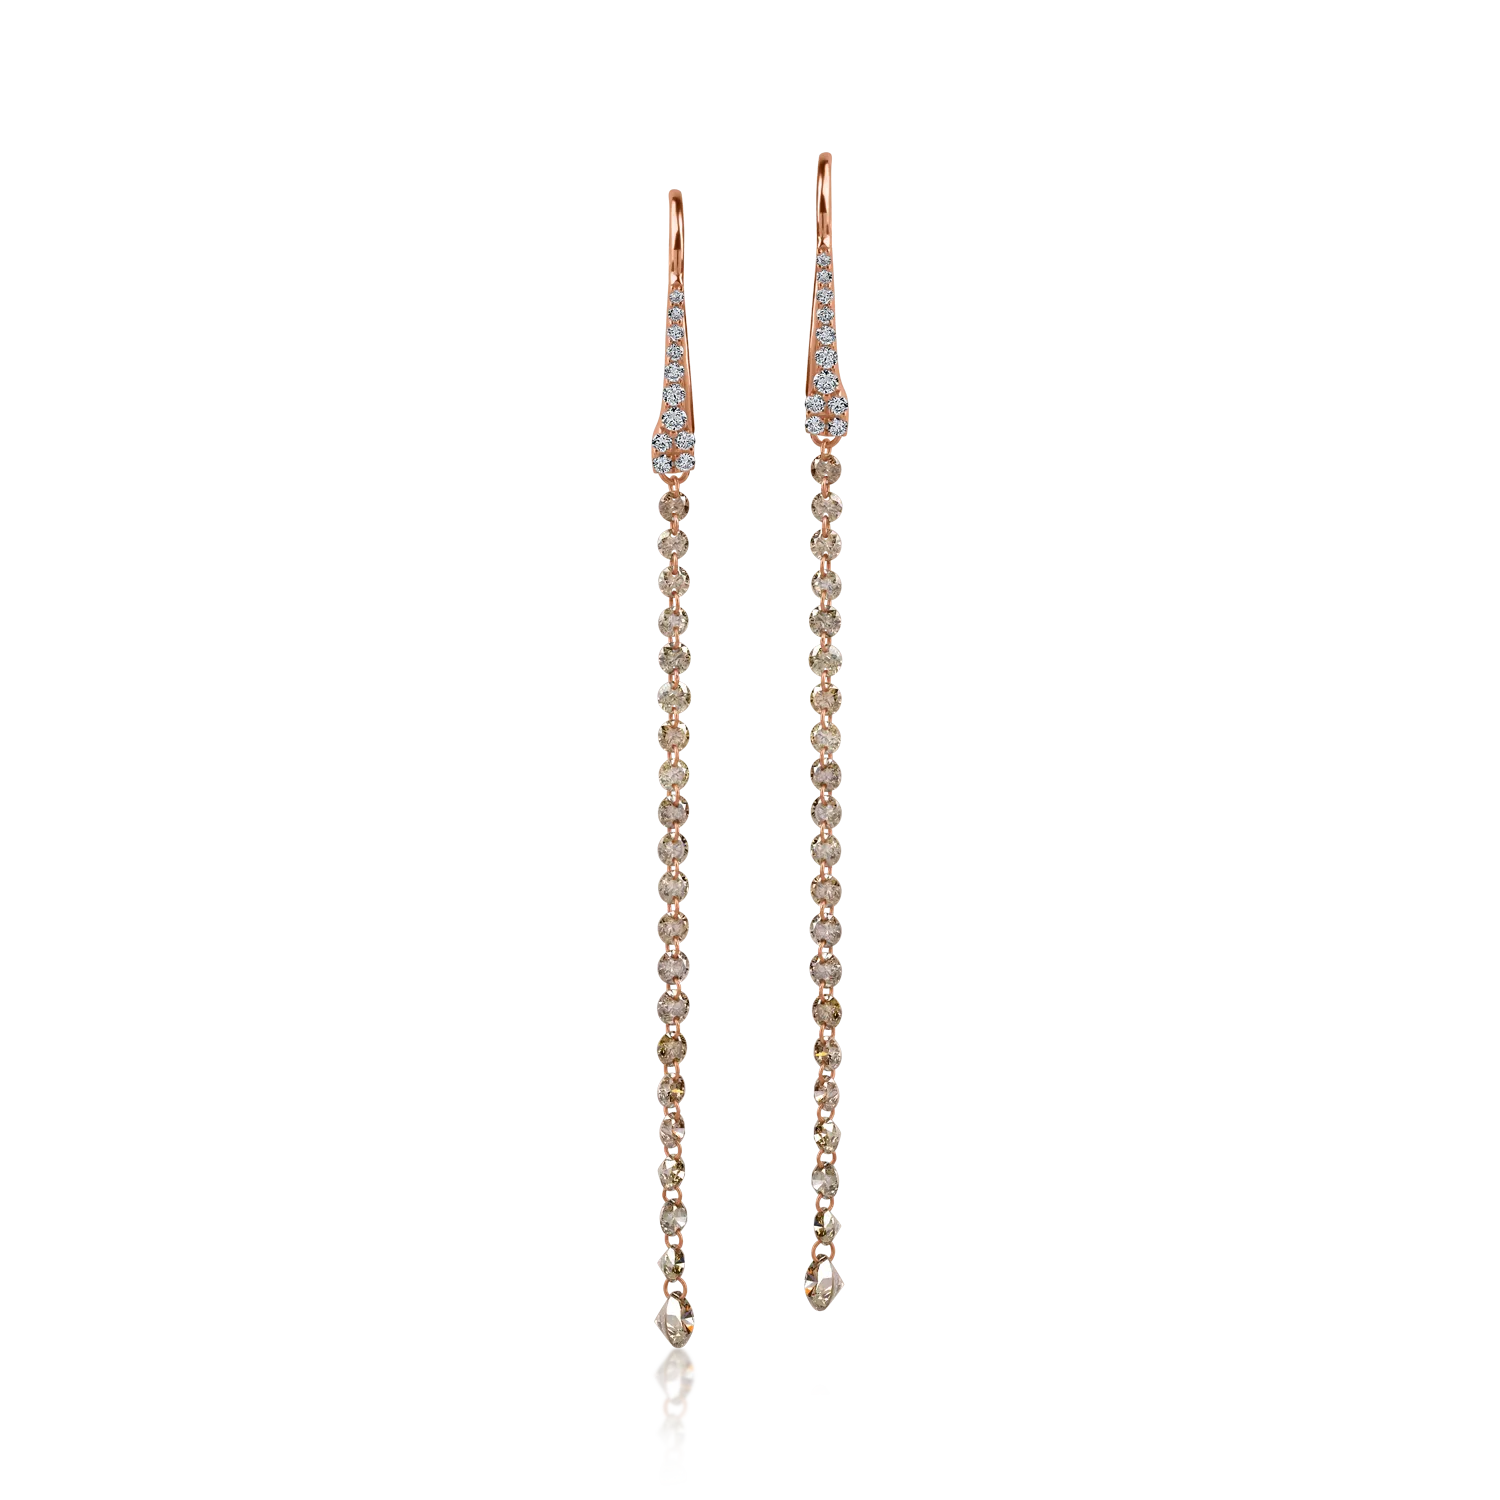 Rose gold long earrings with 1.82ct brown diamonds and 0.18ct clear diamonds